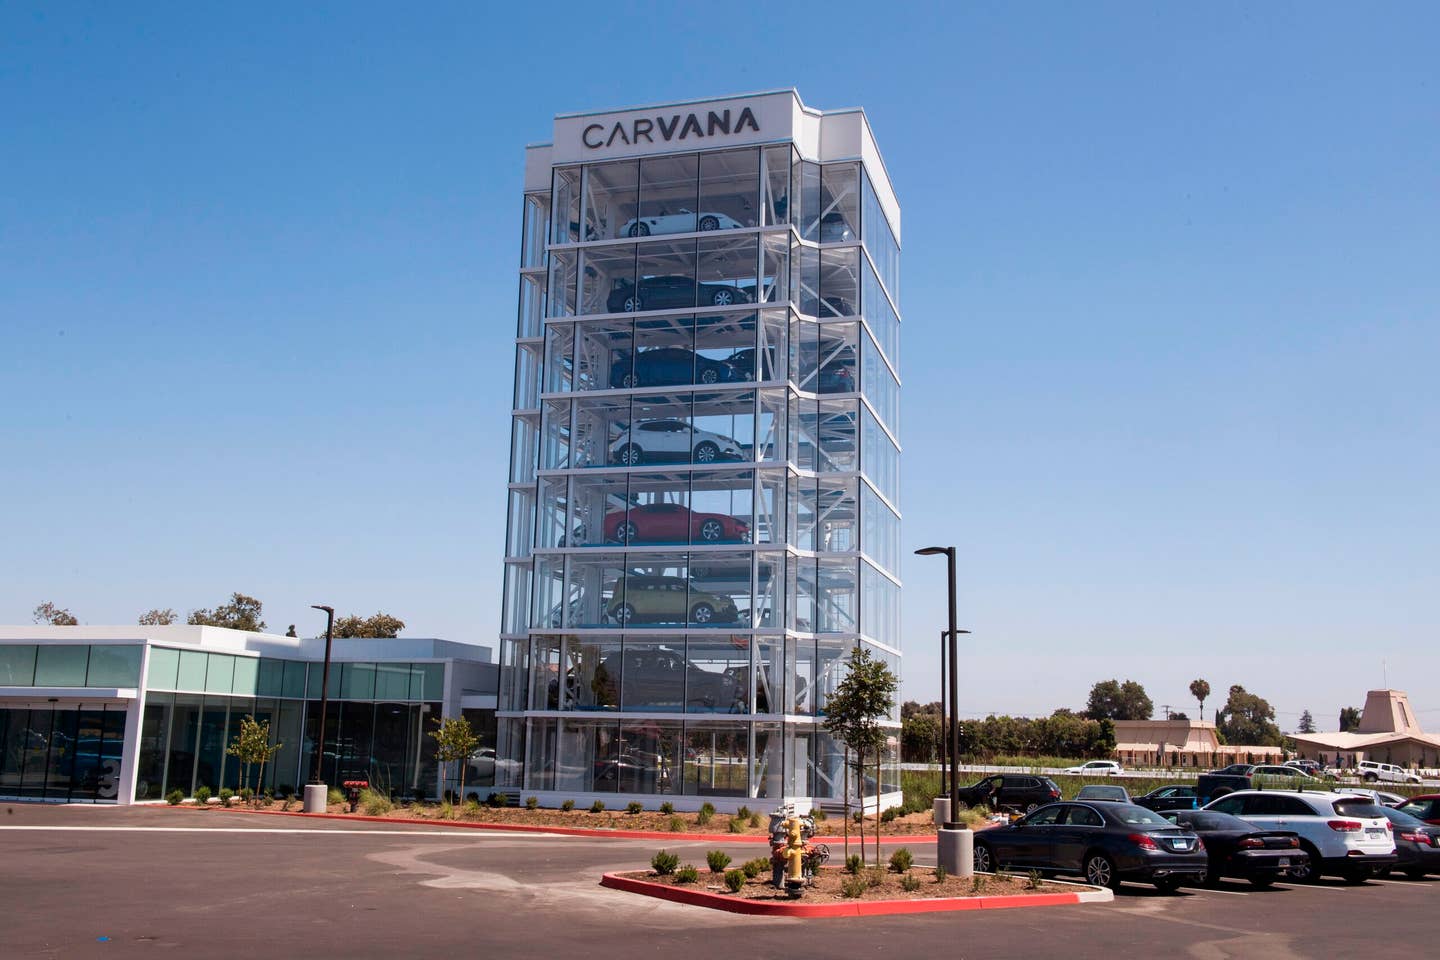 Carvana’s Getting Pummeled On Wall Street. If Only We Could’ve Seen This Coming